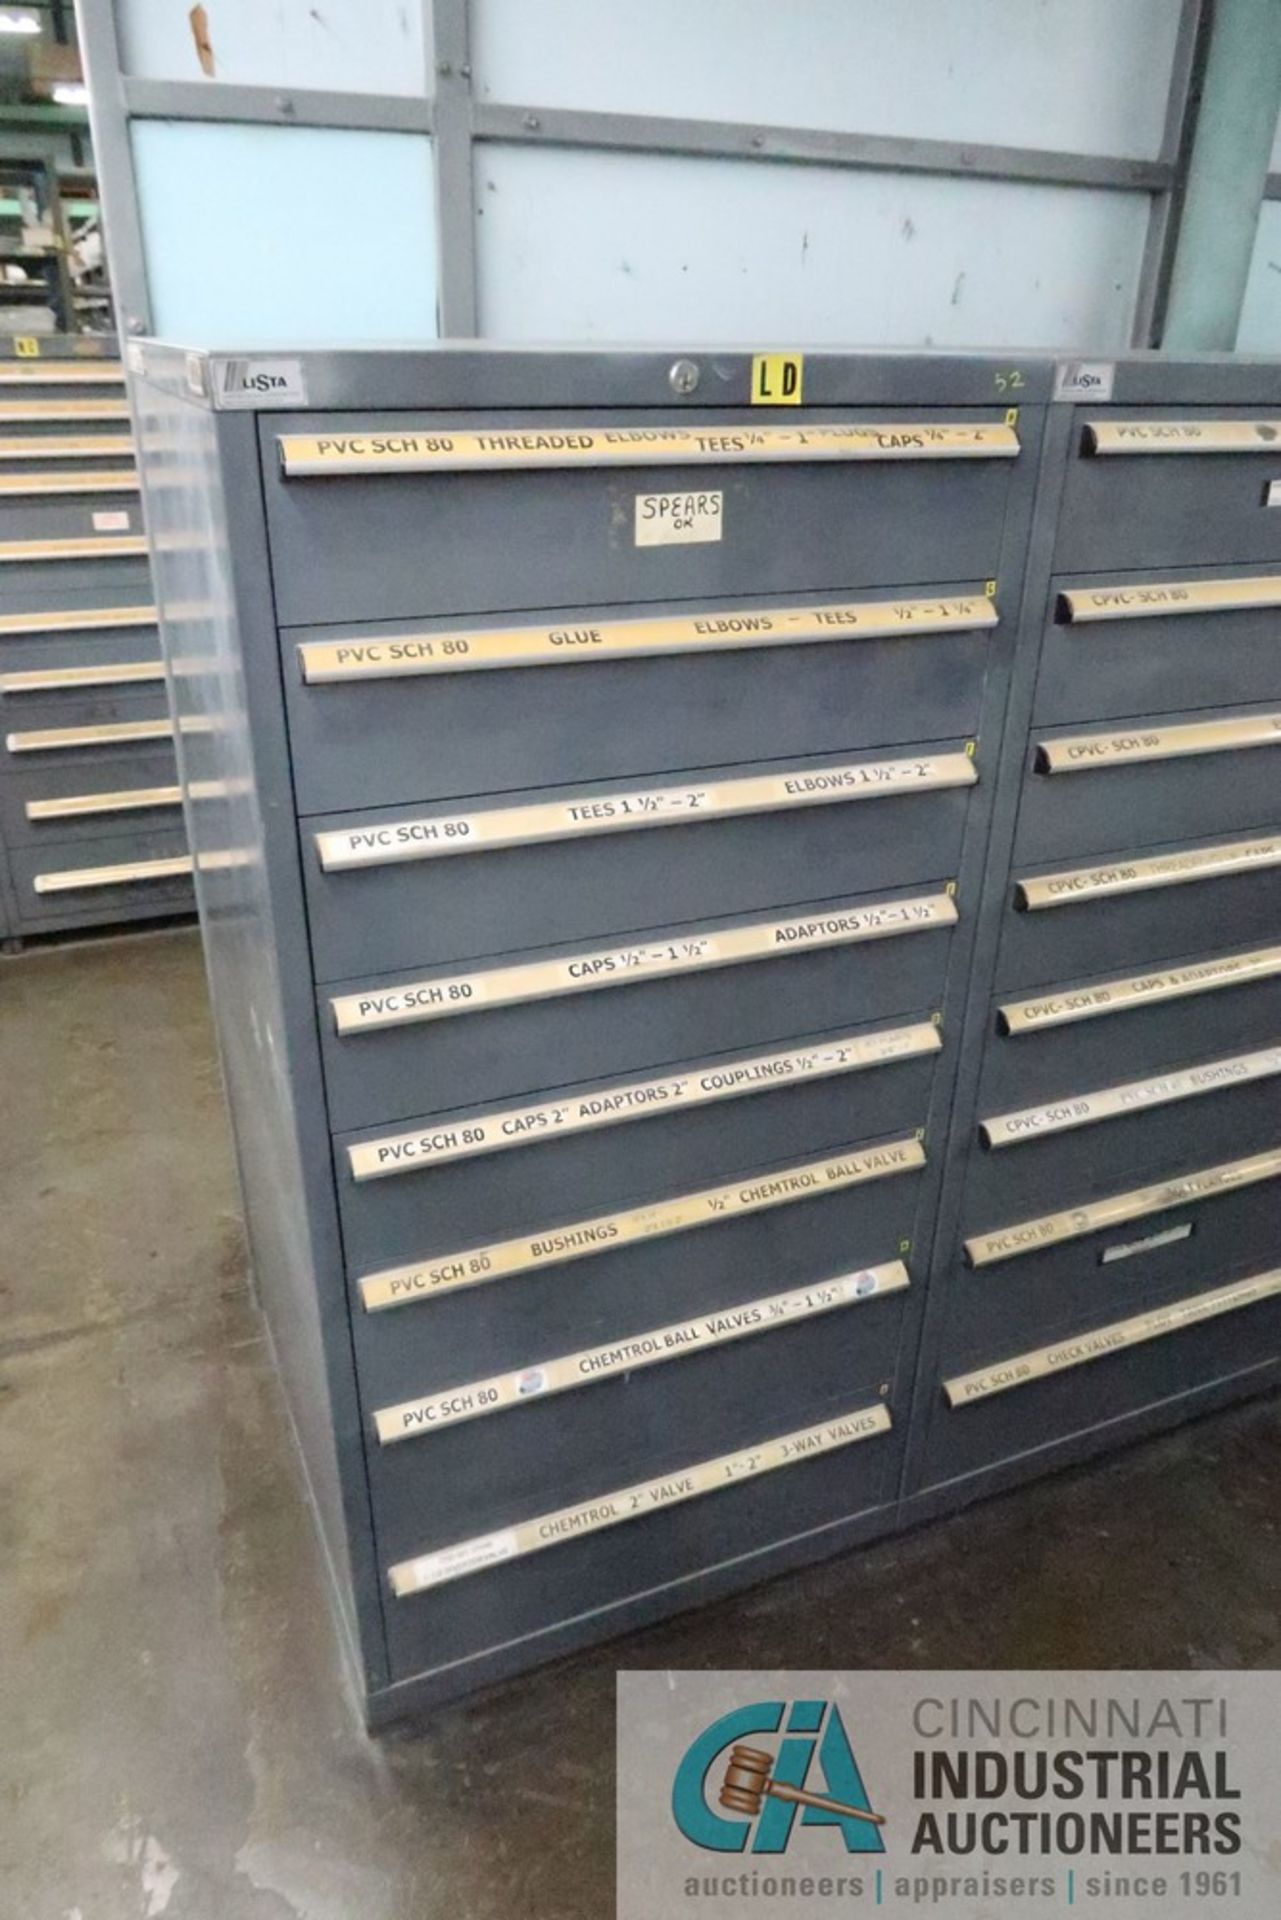 8-DRAWER LISTA CABINET WITH CONTENTS INCLUDING MISCELLANEOUS PLUMBING PARTS, ELBOWS, TEES,